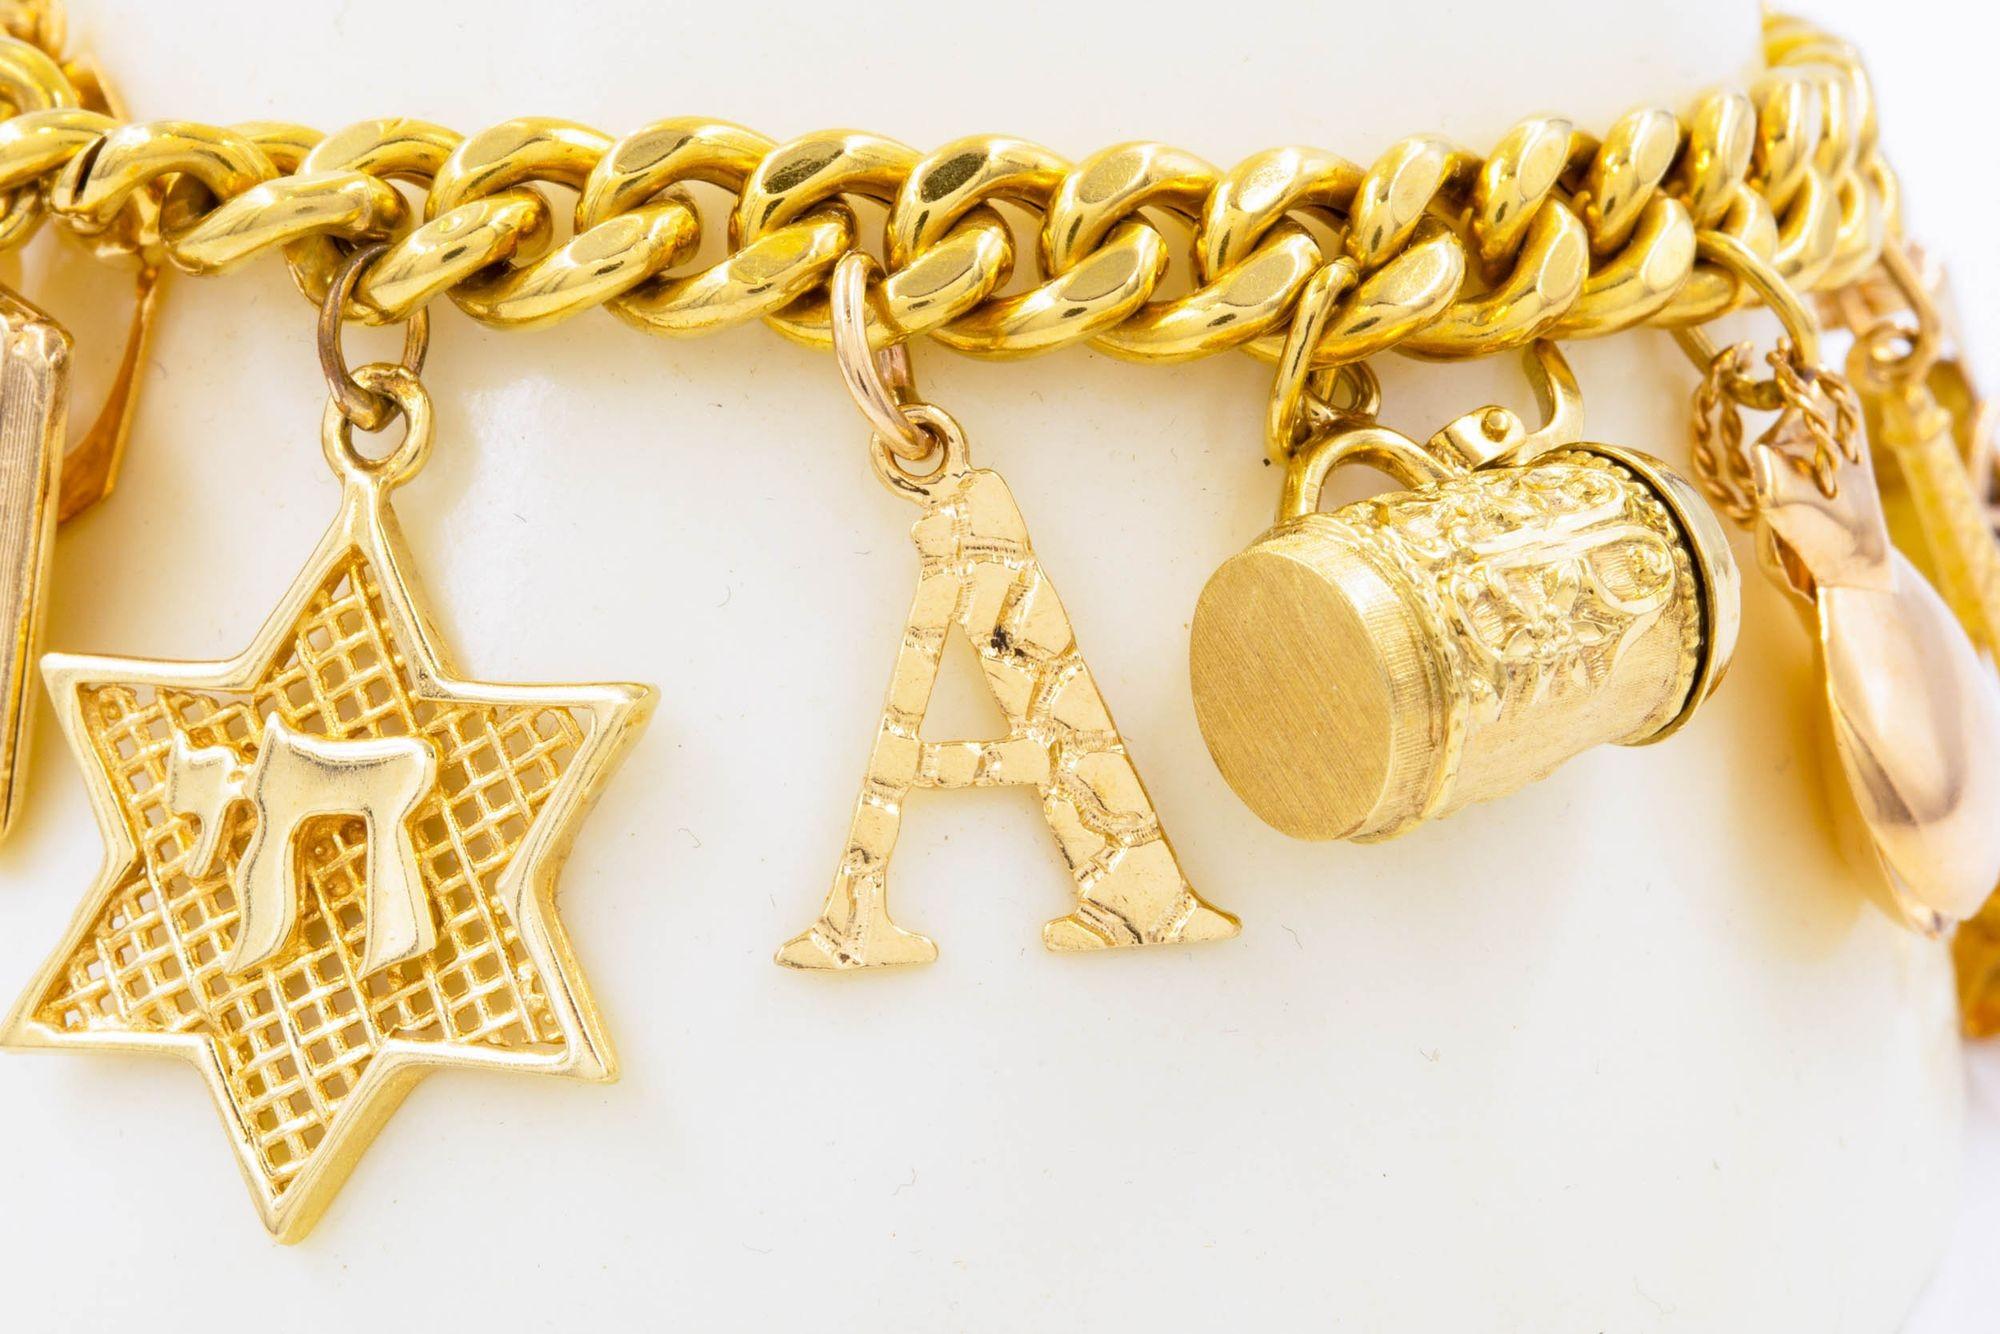 Vintage Italian 18k Gold Bracelet with 14k Gold Charms by Uno-a-Erre 13